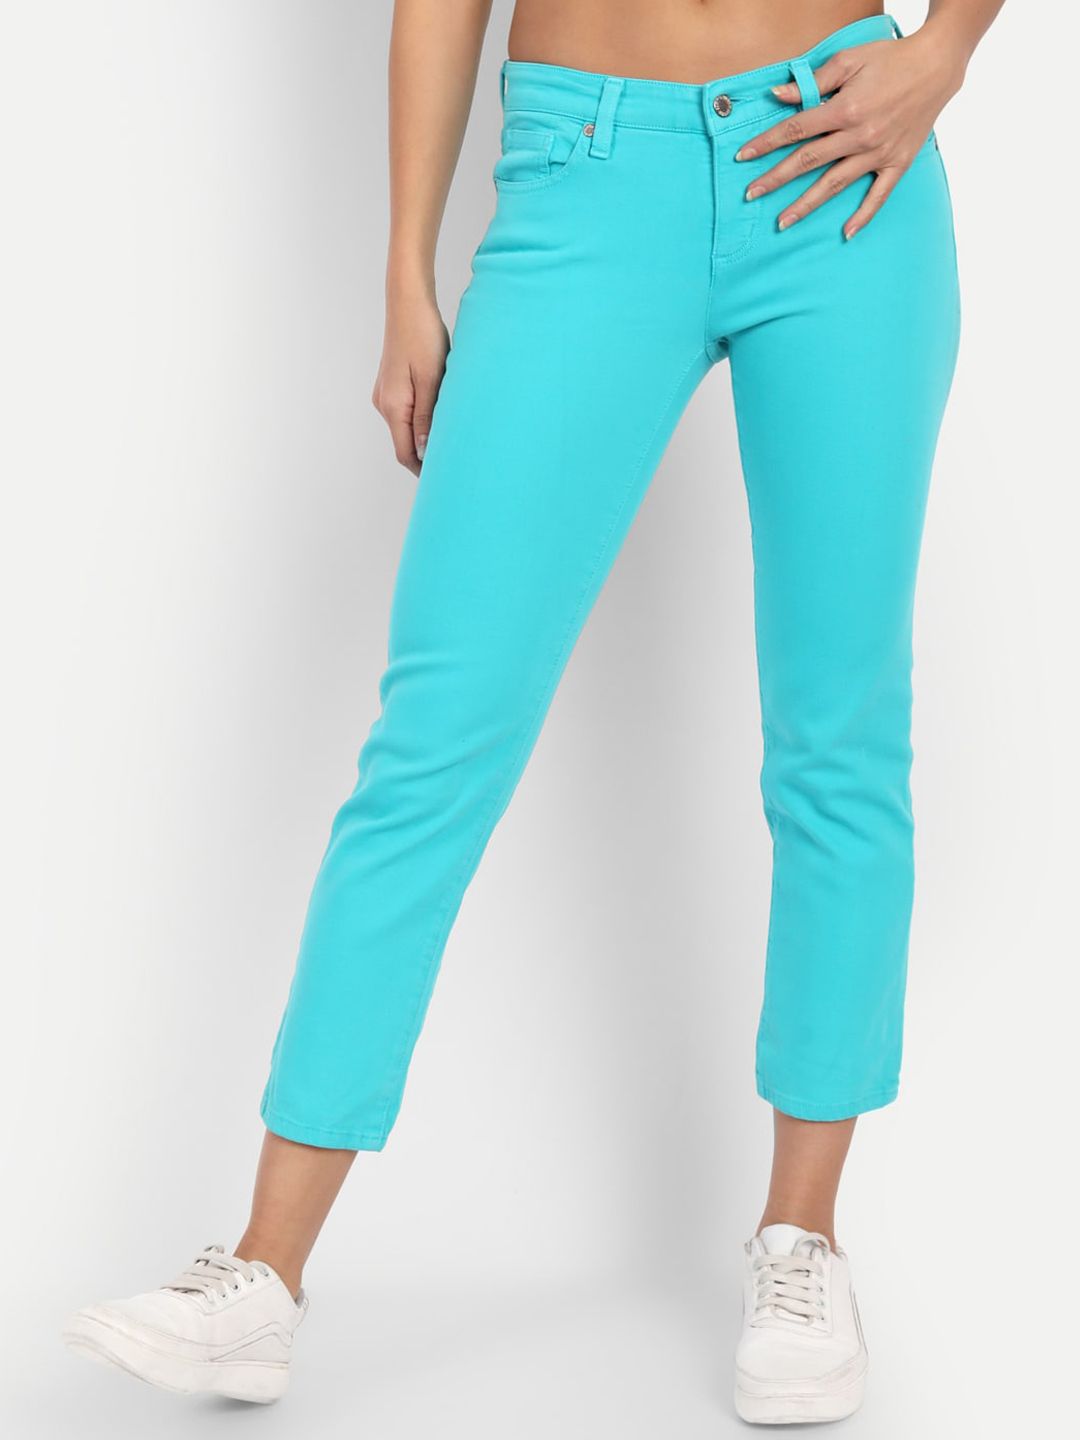 BROADSTAR Women Turquoise Blue Skinny Fit Stretchable Jeans Price in India